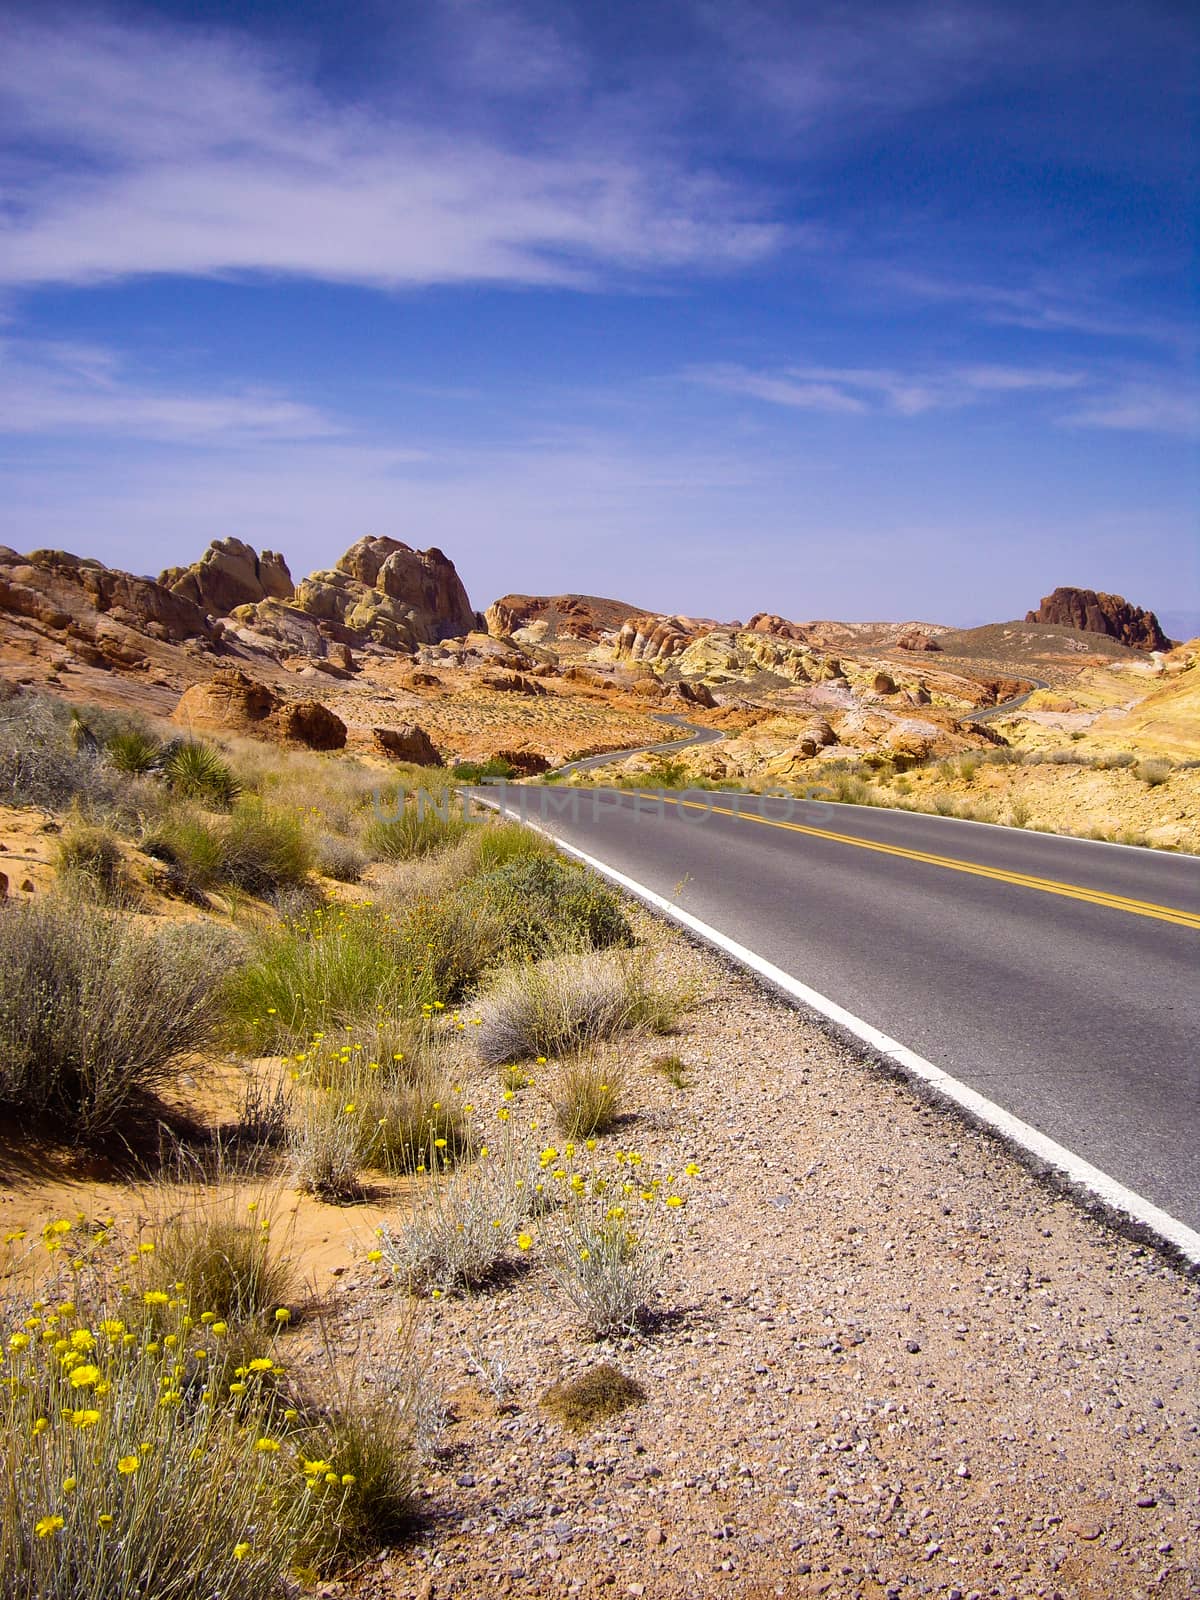 Long winding road through Valley of Fire State Park by emattil